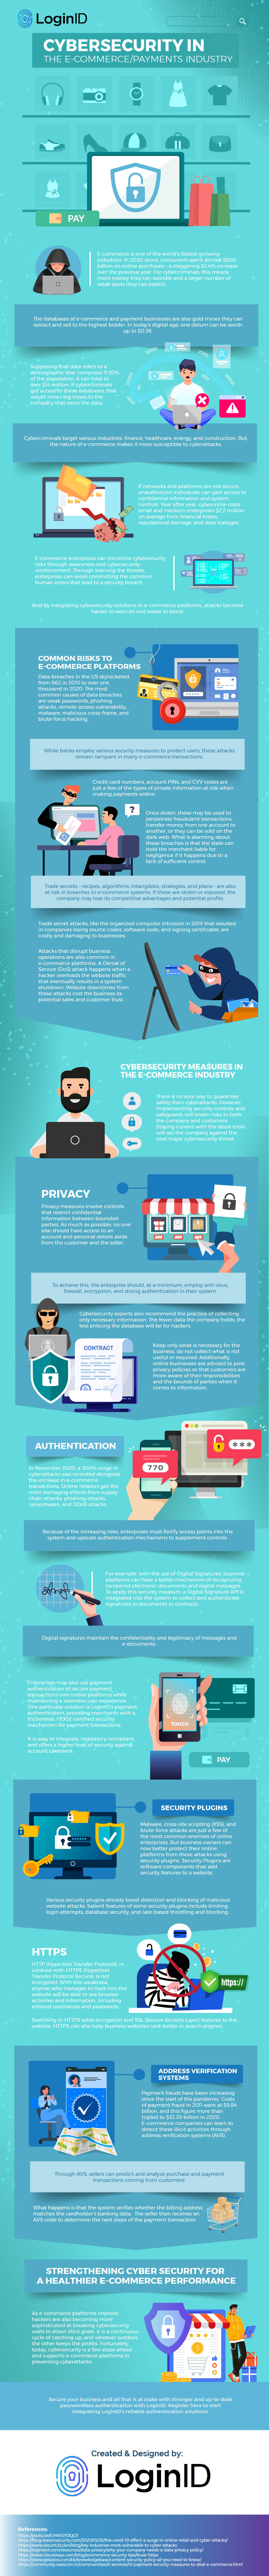 Cybersecurity in the E-commerce/Payments Industry